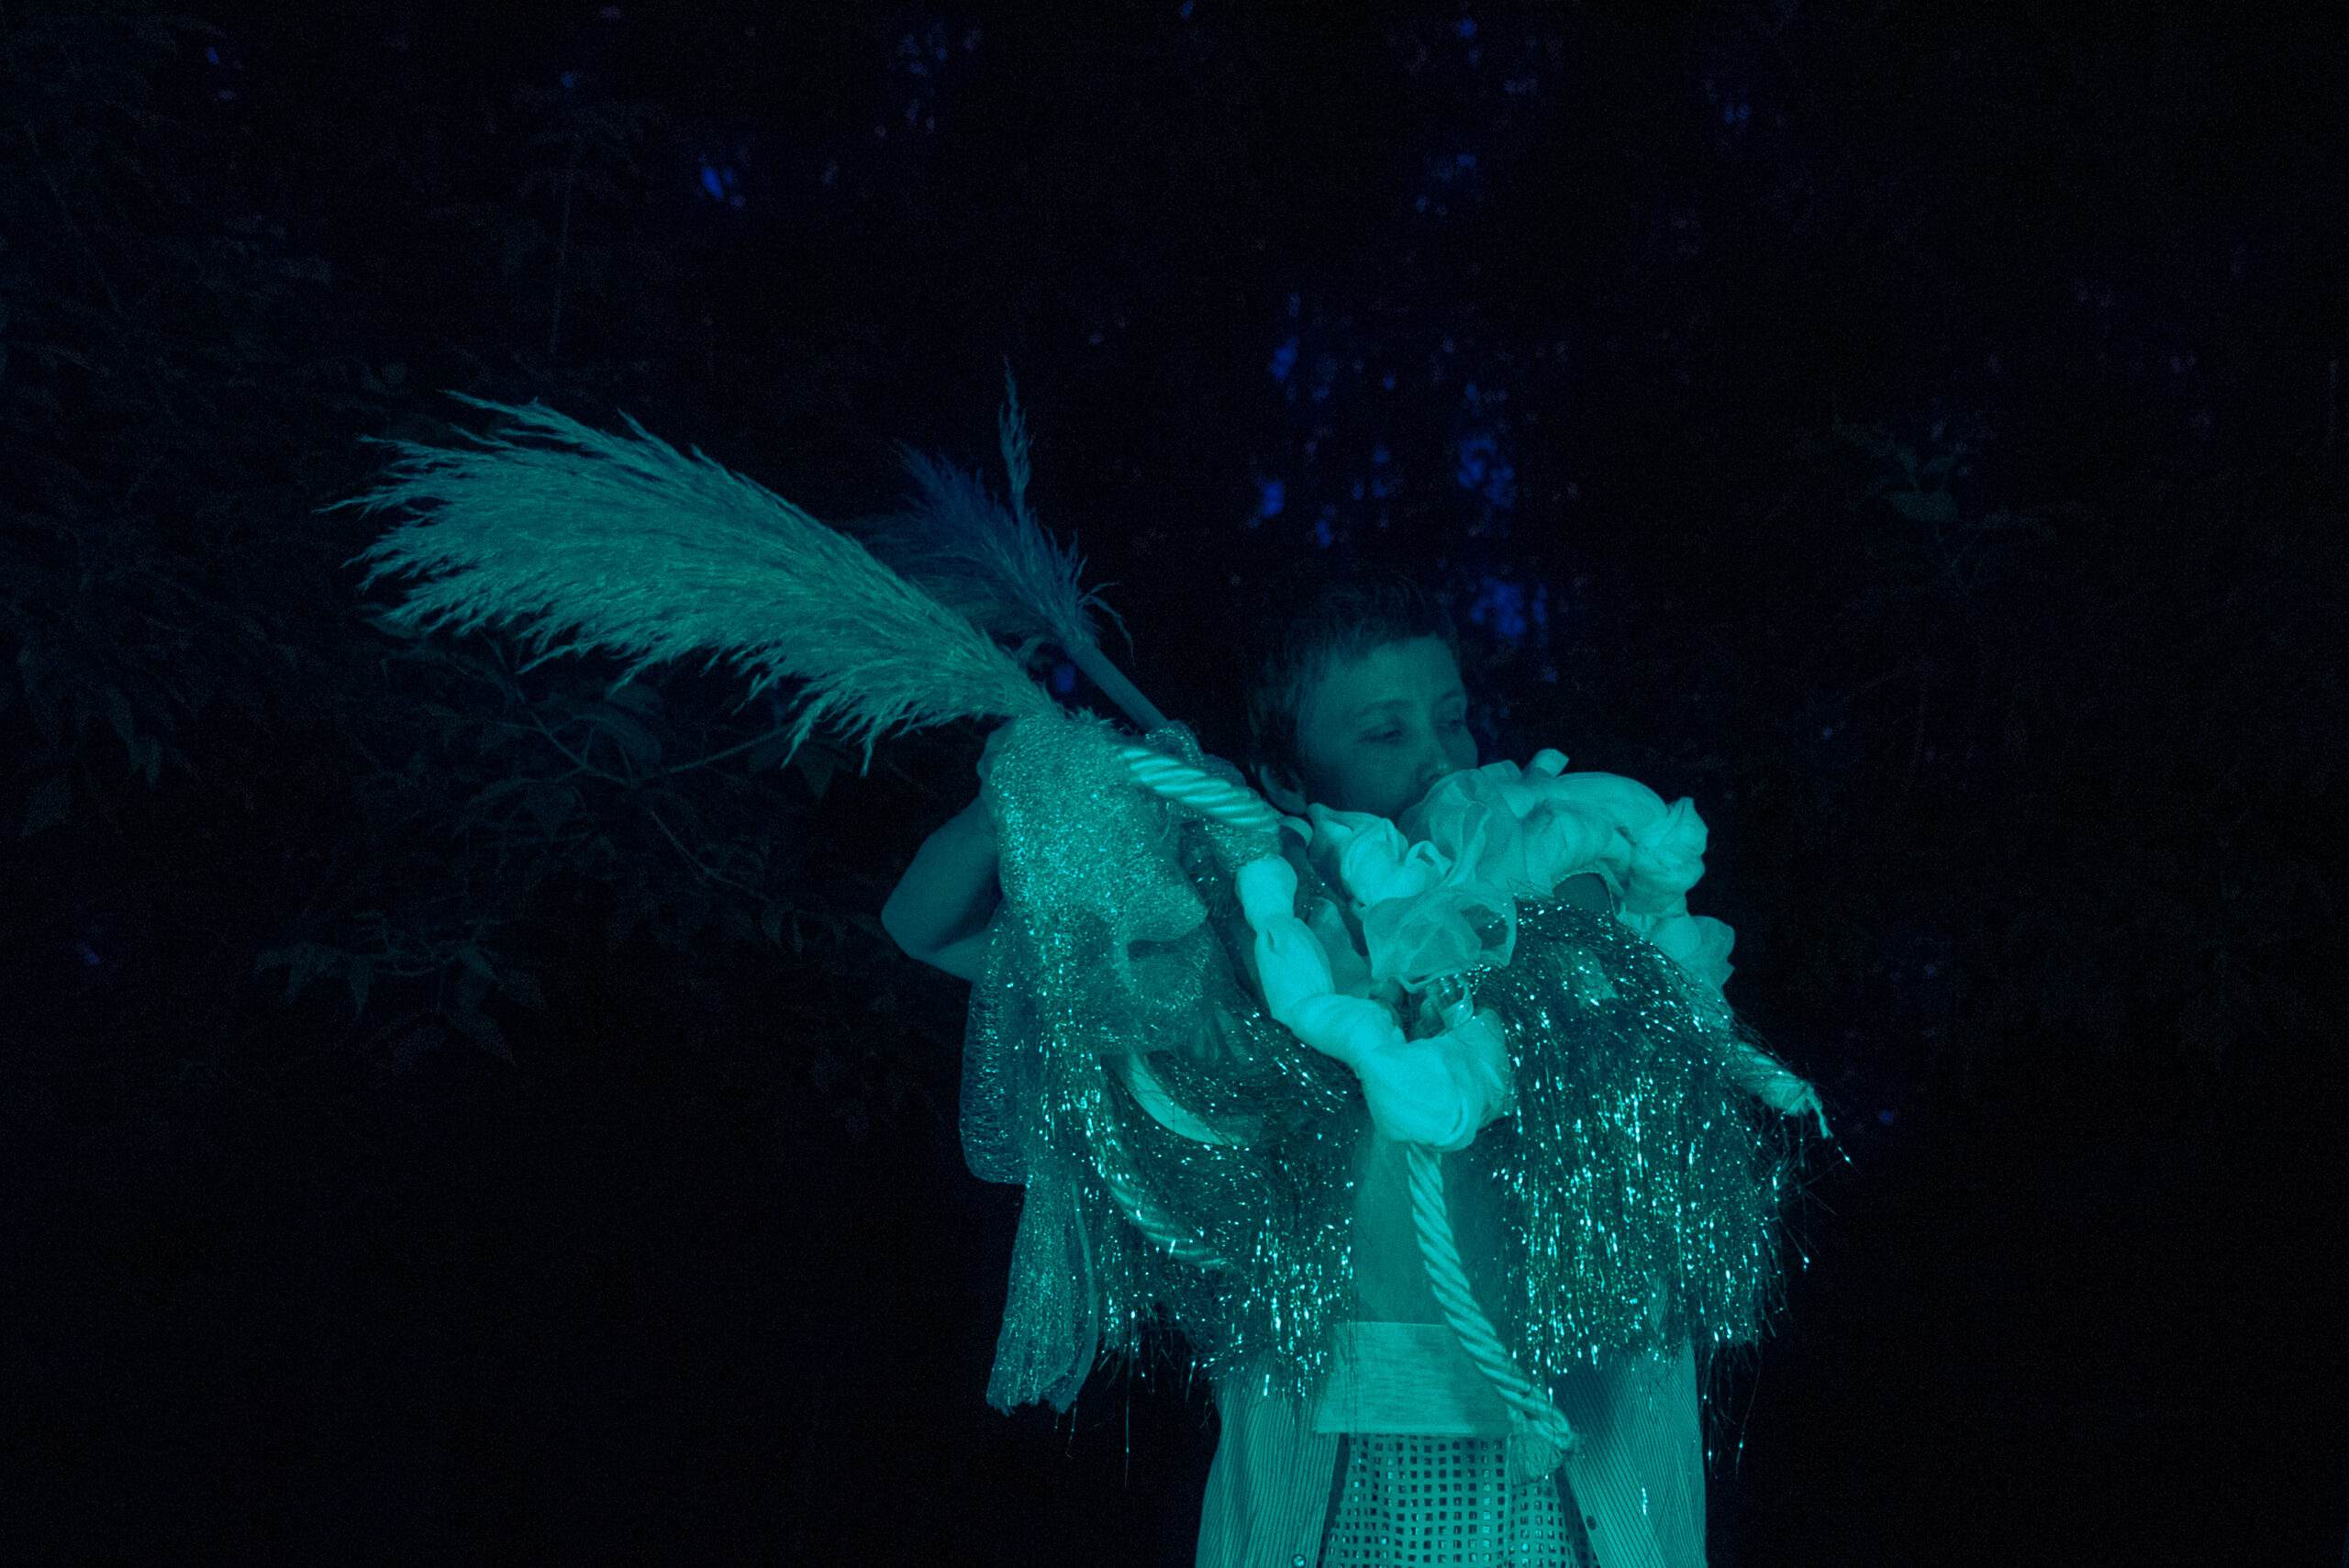 A person is holding a sculpture made from dried plants, sticks, and fabric. It is night time and the figure is lit up with green and blue light.